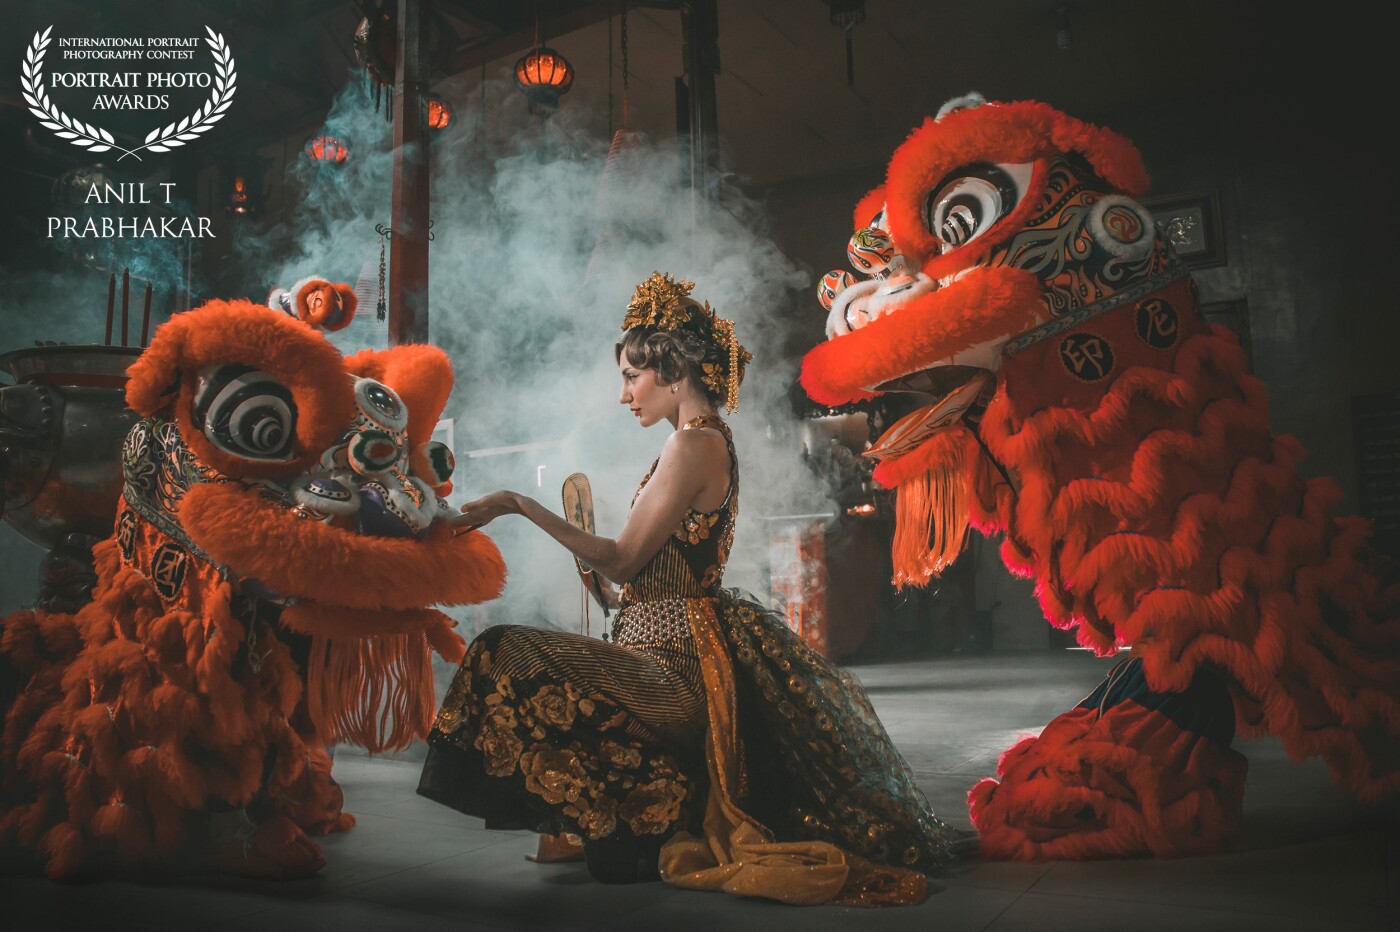 The Princess and Barongsai/Singa Barong: Lion dance is a form of traditional dance in Chinese culture and other Asian countries in which performers mimic a lion's movements in a lion costume to bring good luck and fortune. The lion dance is usually performed during the Chinese New Year and other Chinese traditional, cultural, and religious festivals. It may also be performed on important occasions such as business opening events, special celebrations, or wedding ceremonies, or may be used to honor special guests by the Chinese communities.